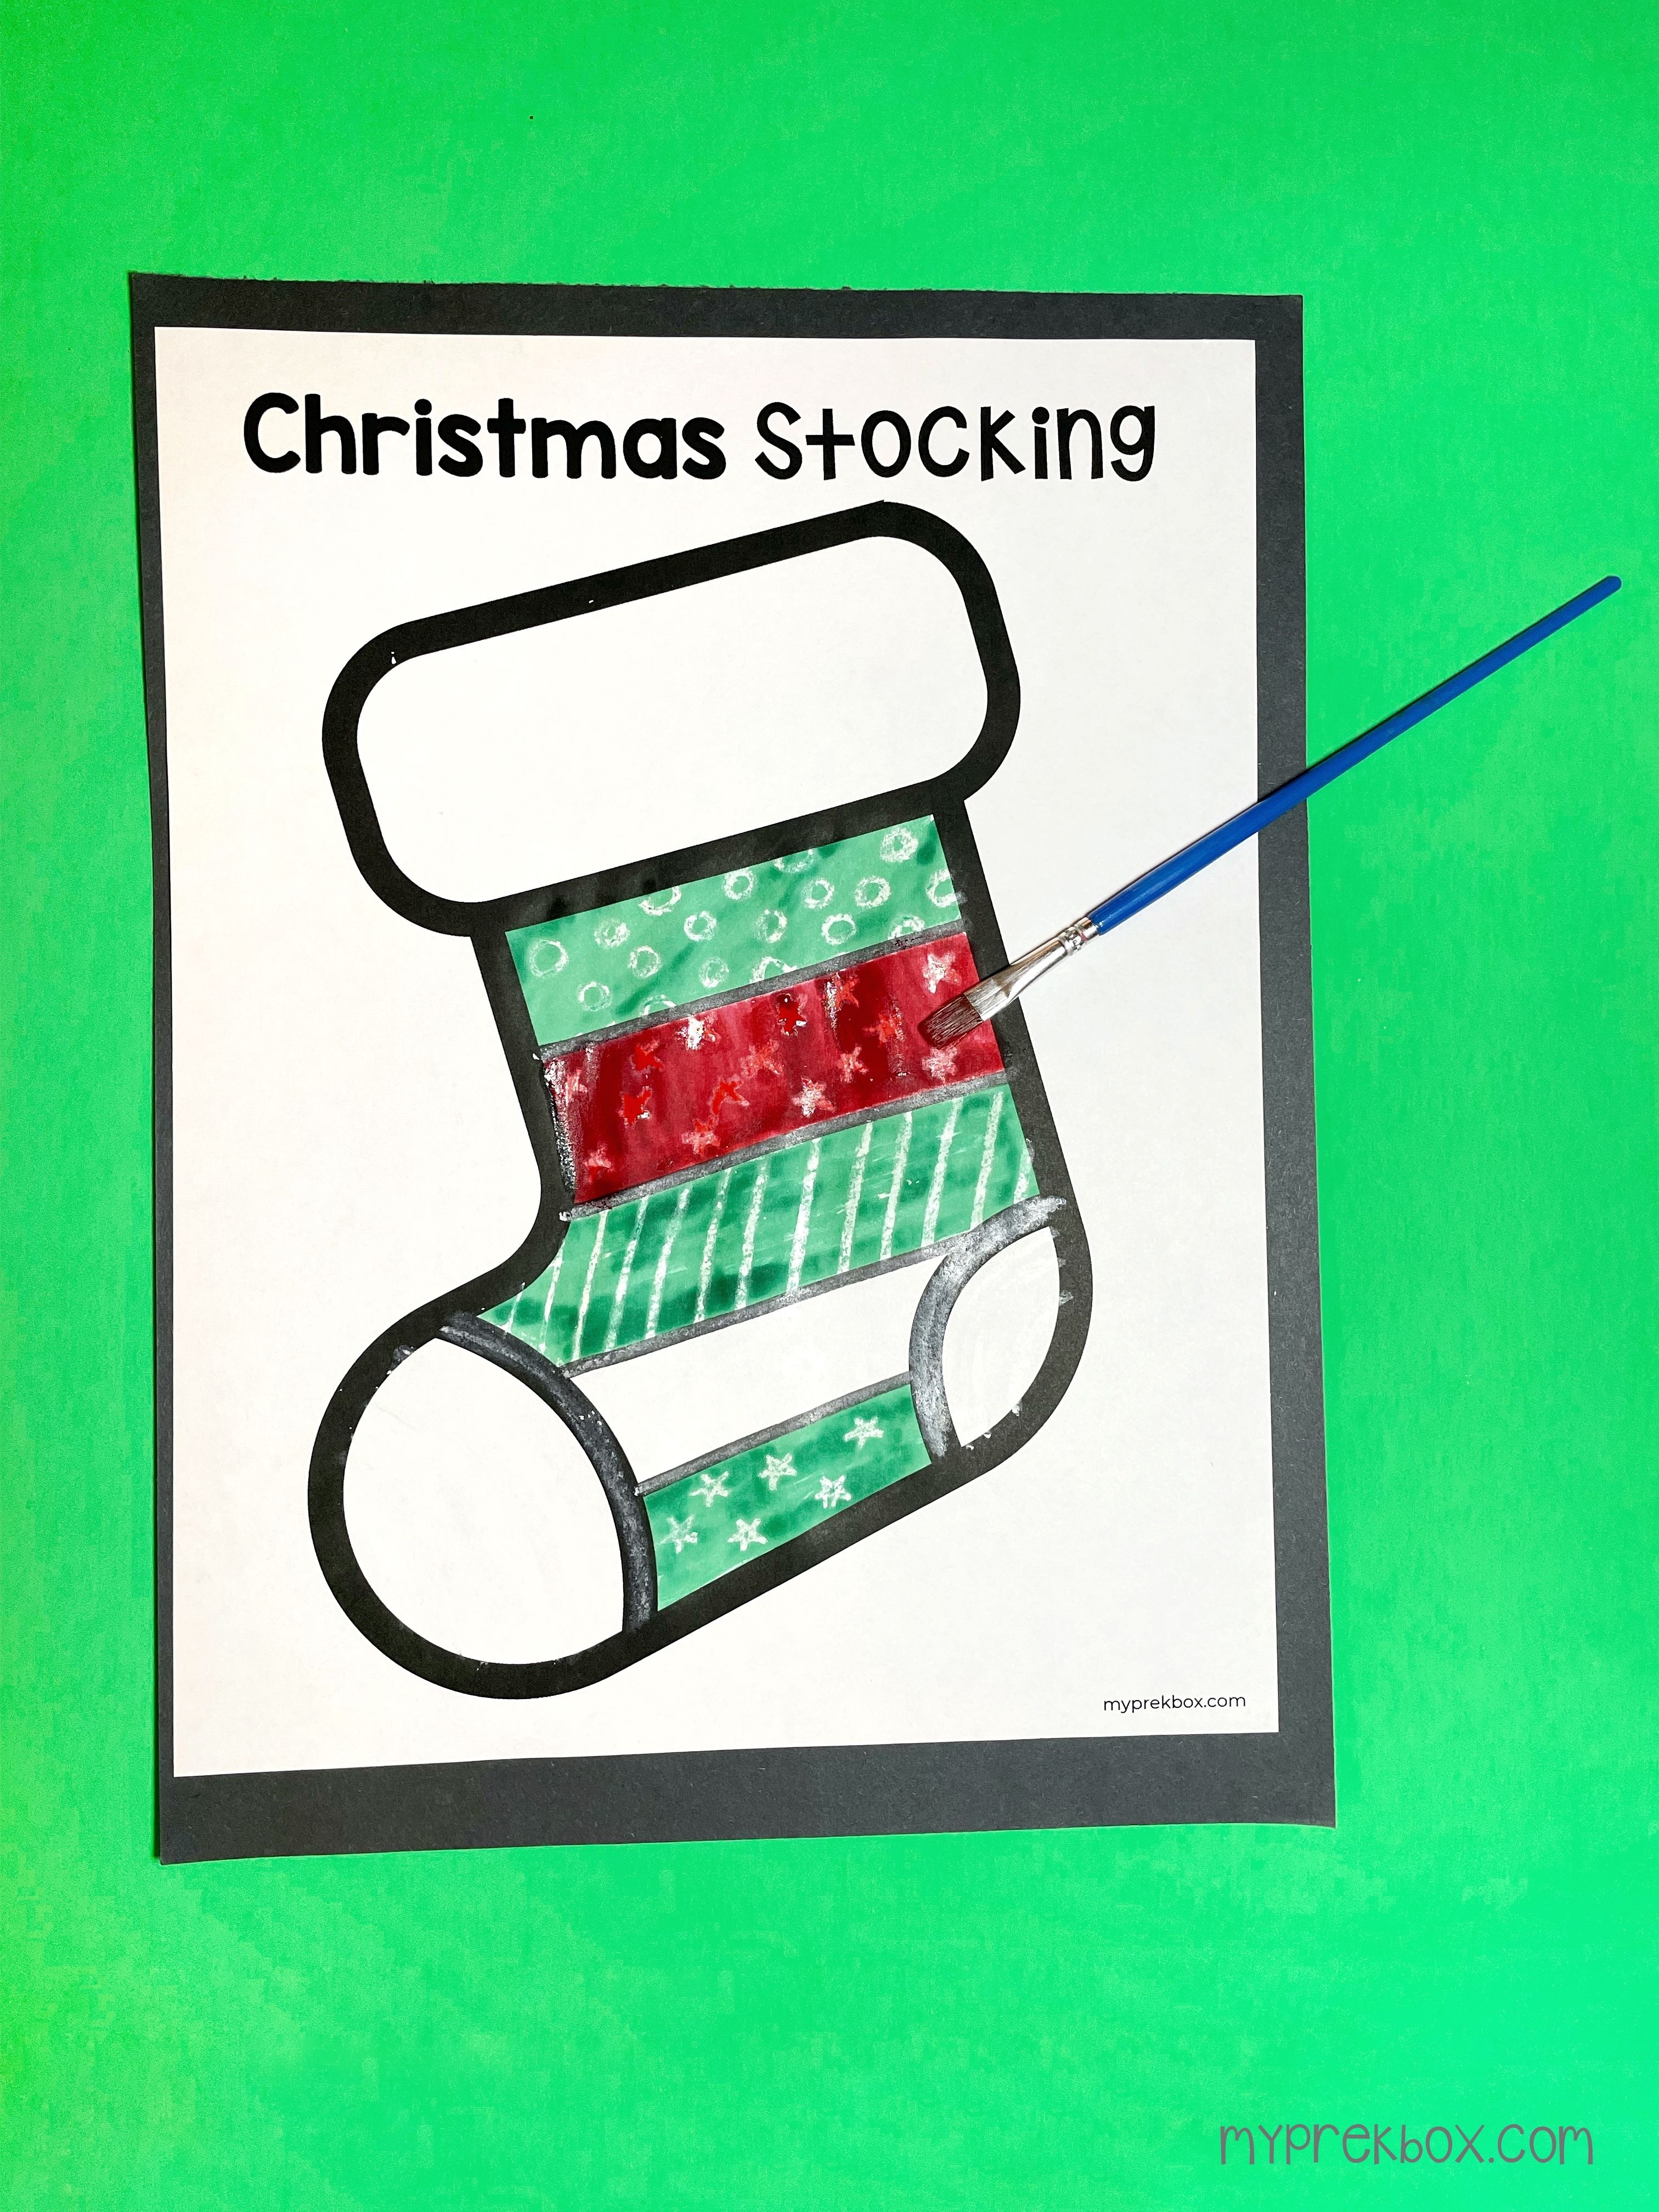 painting on paint resist stocking